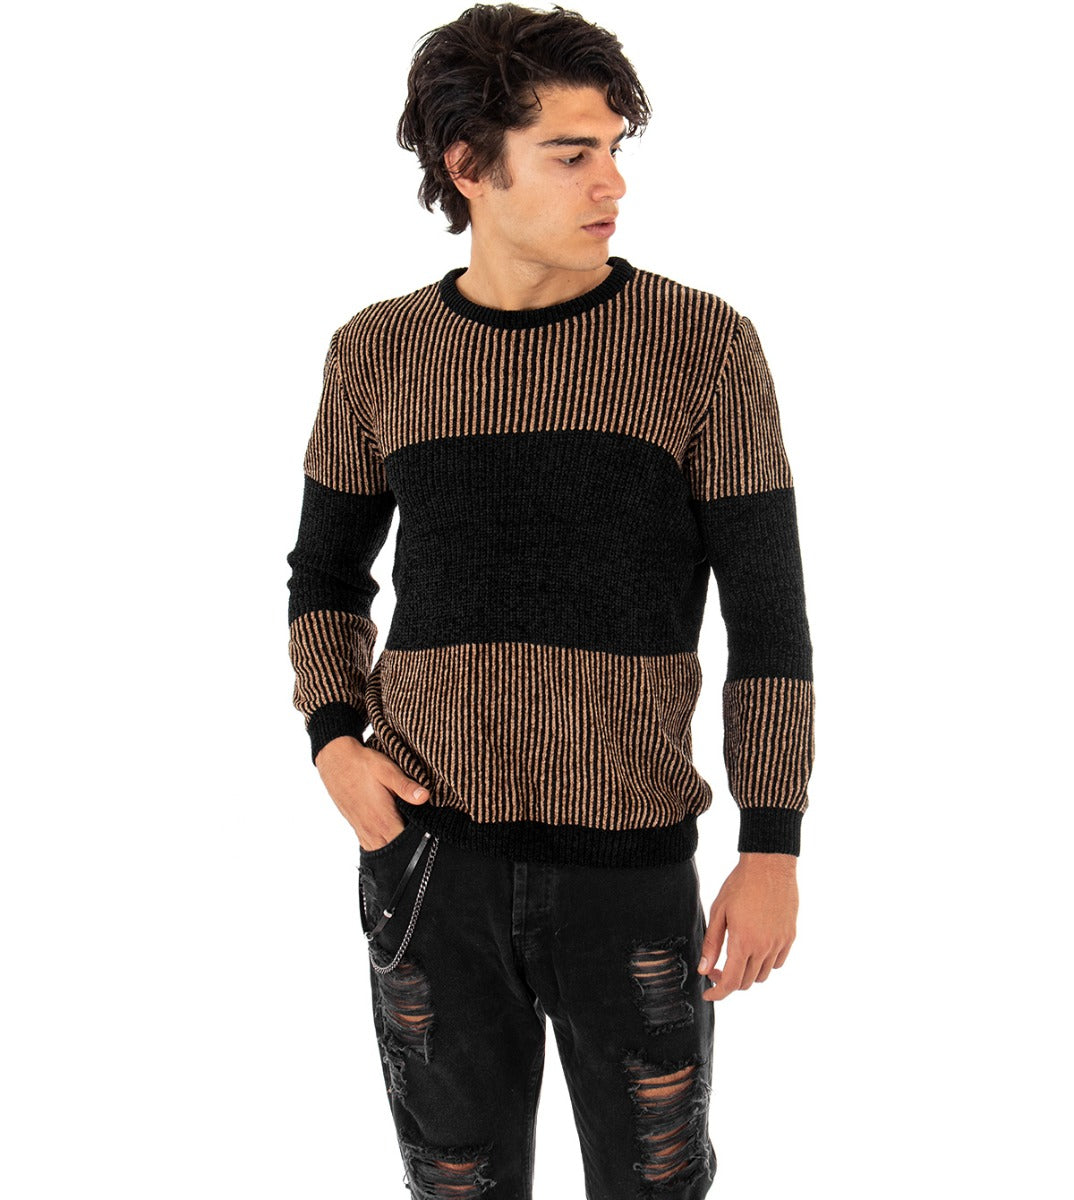 Men's Crew Neck Two-Tone Sweater Black Camel Casual Long Sleeves Striped Pullover GIOSAL